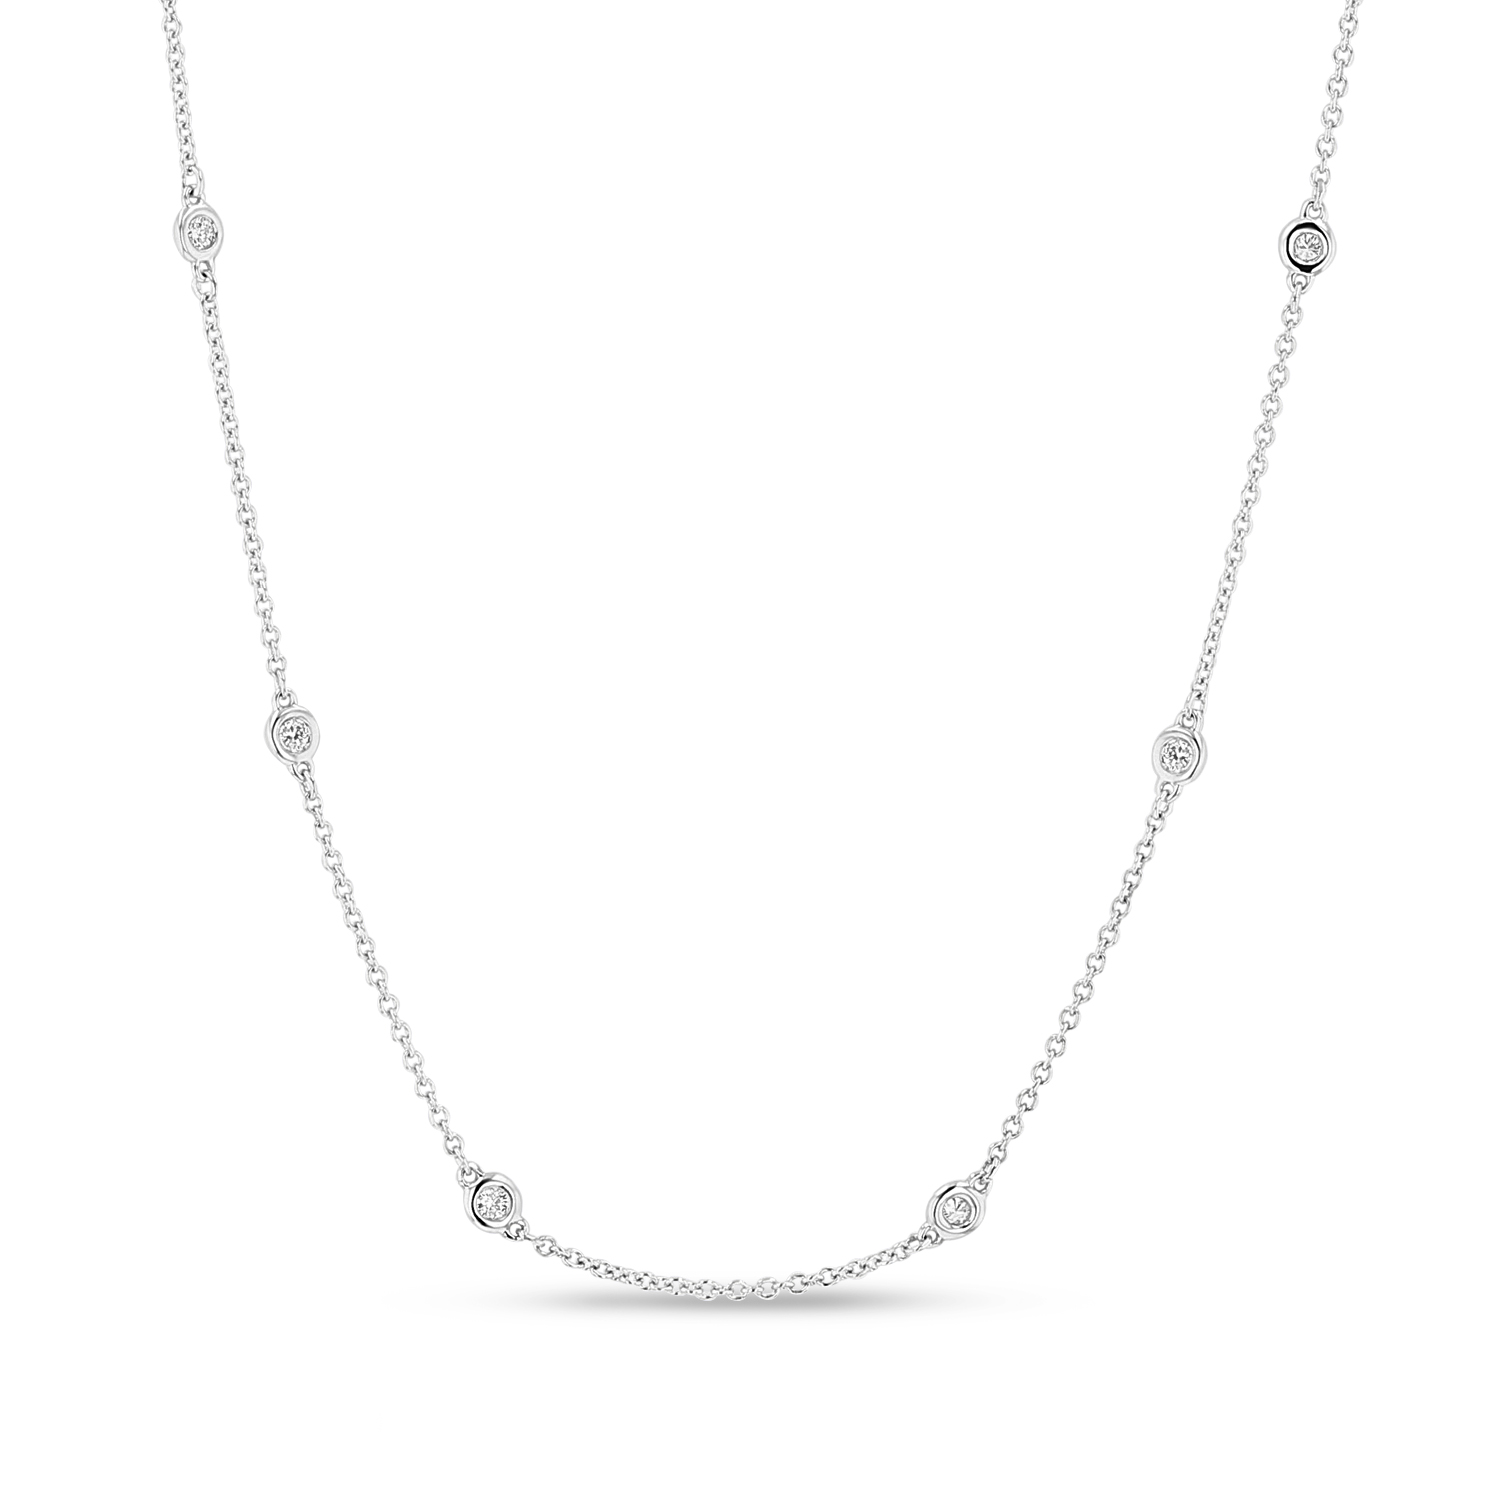 View 0.35ctw 20 inch Diamond By the Yard Necklace in 14k White Gold